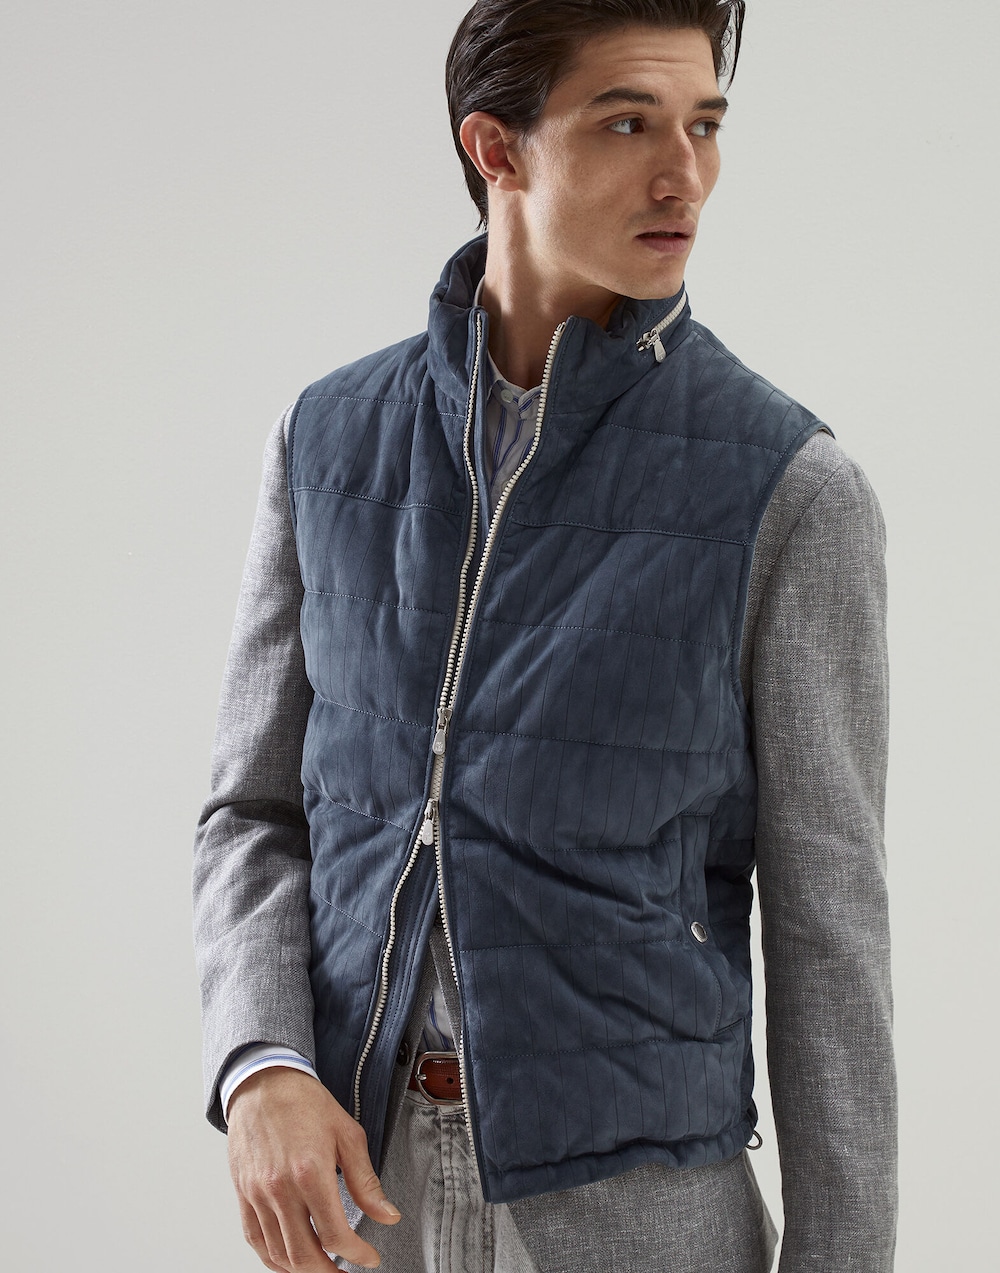 Men's luxurious clothing | Ready to wear | Brunello Cucinelli